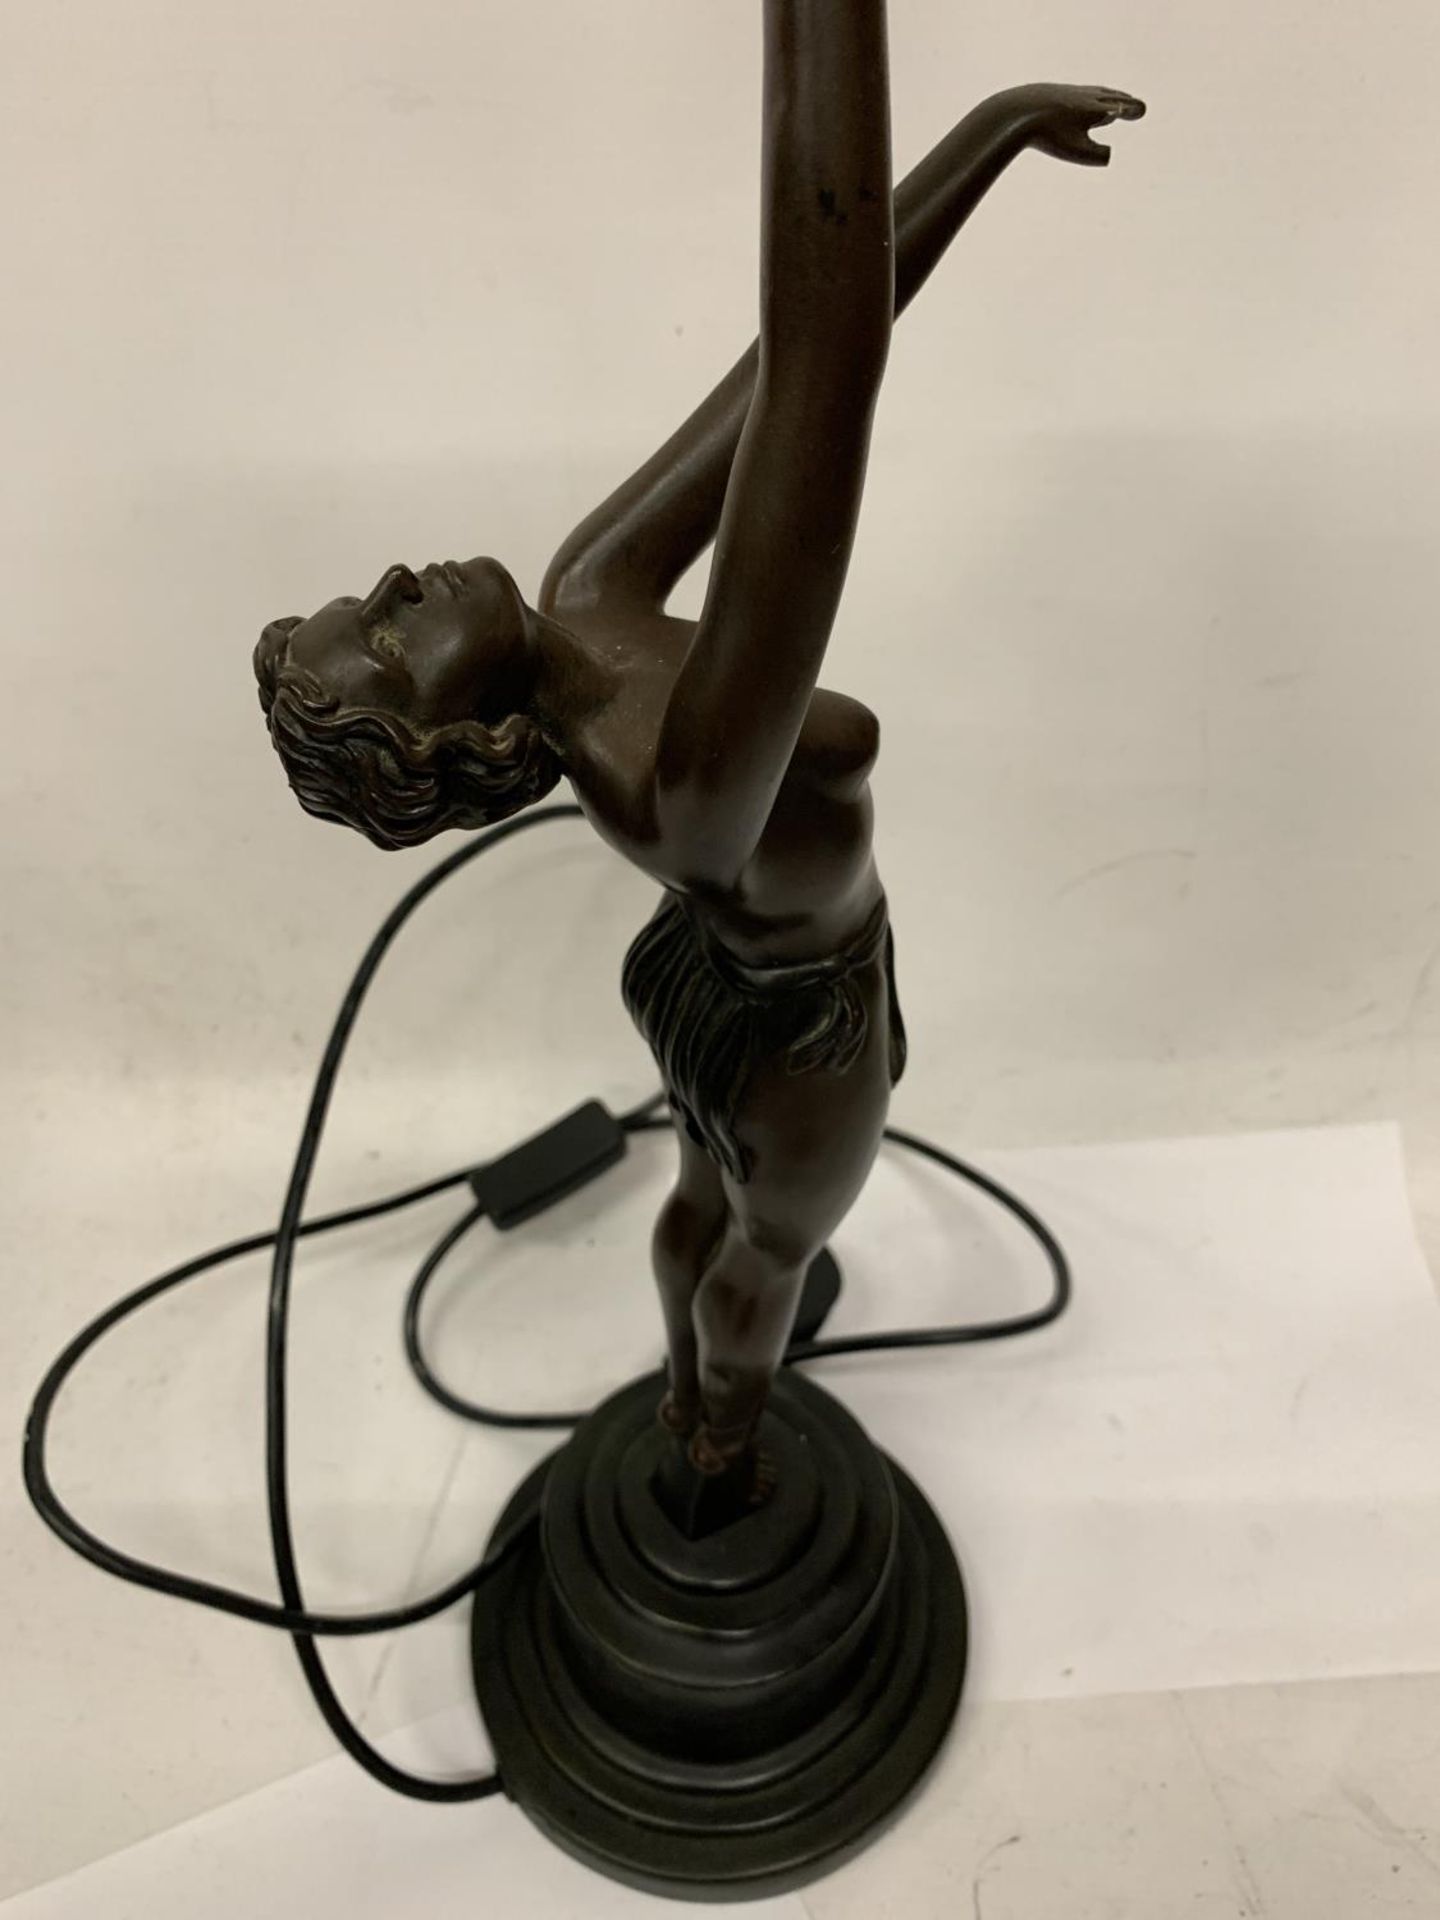 AN ART DECO BRONZE ART LAMP WITH SHADE - "NORA STANDING" - Image 3 of 4